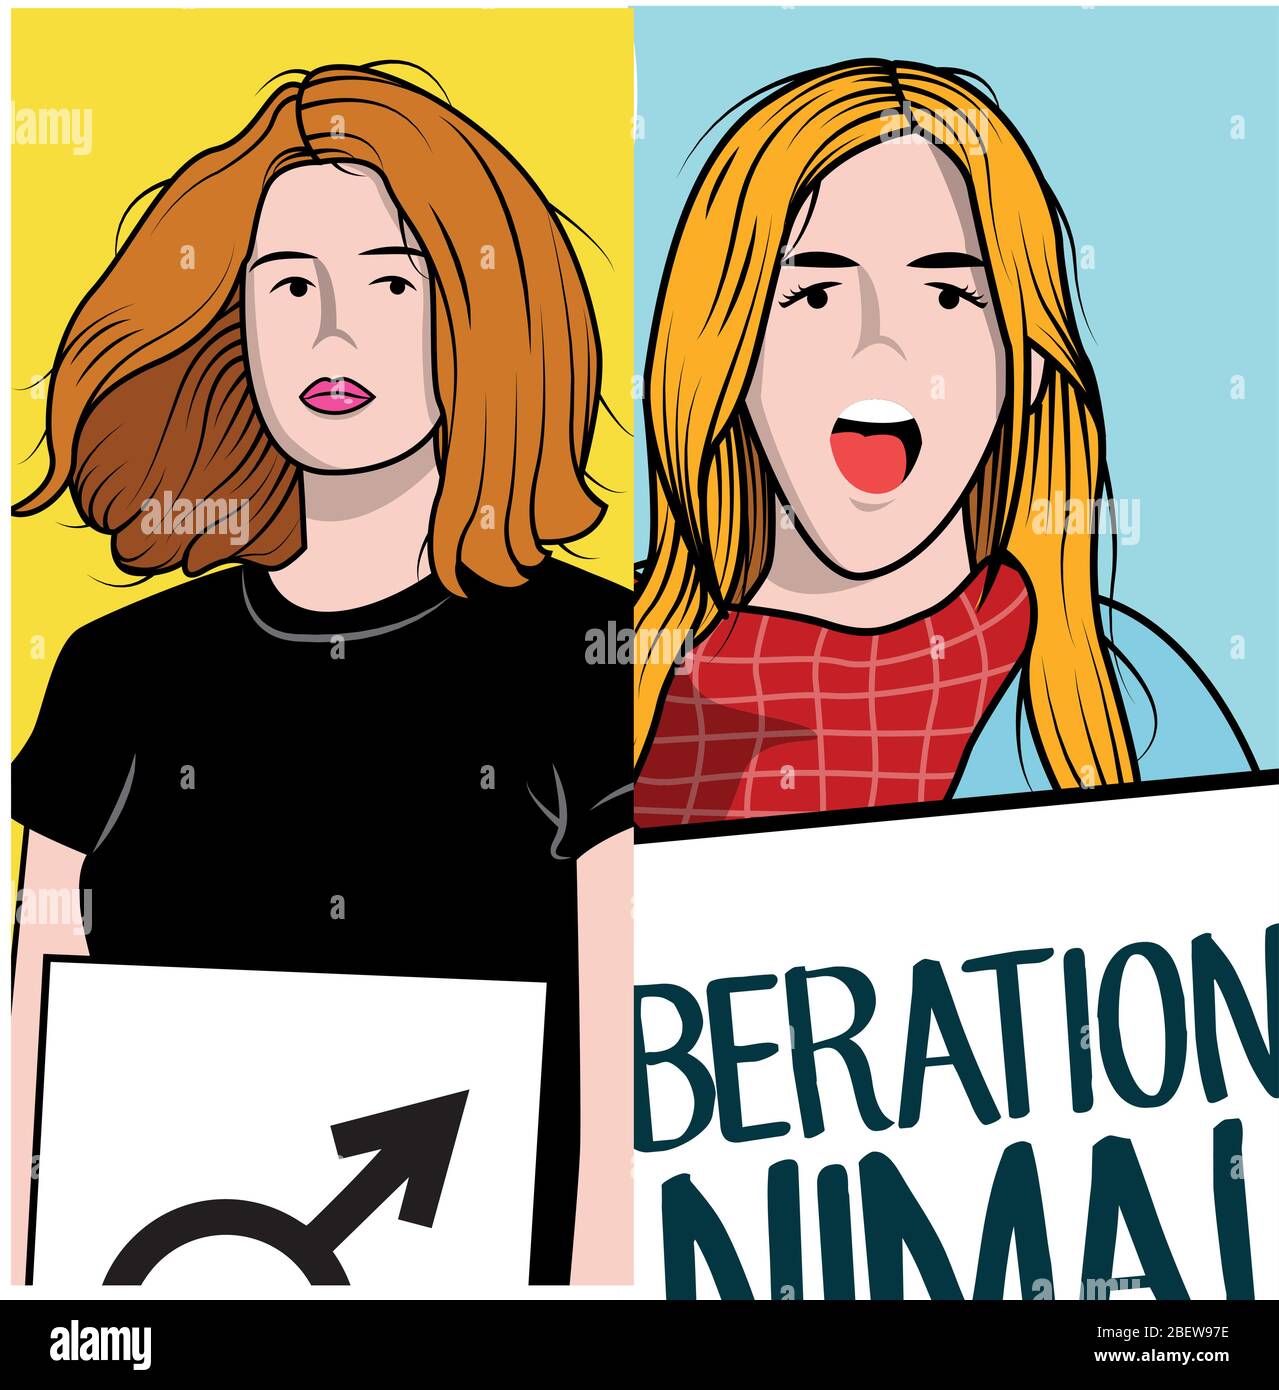 activist woman for equality and activist woman for animal liberation Stock Vector